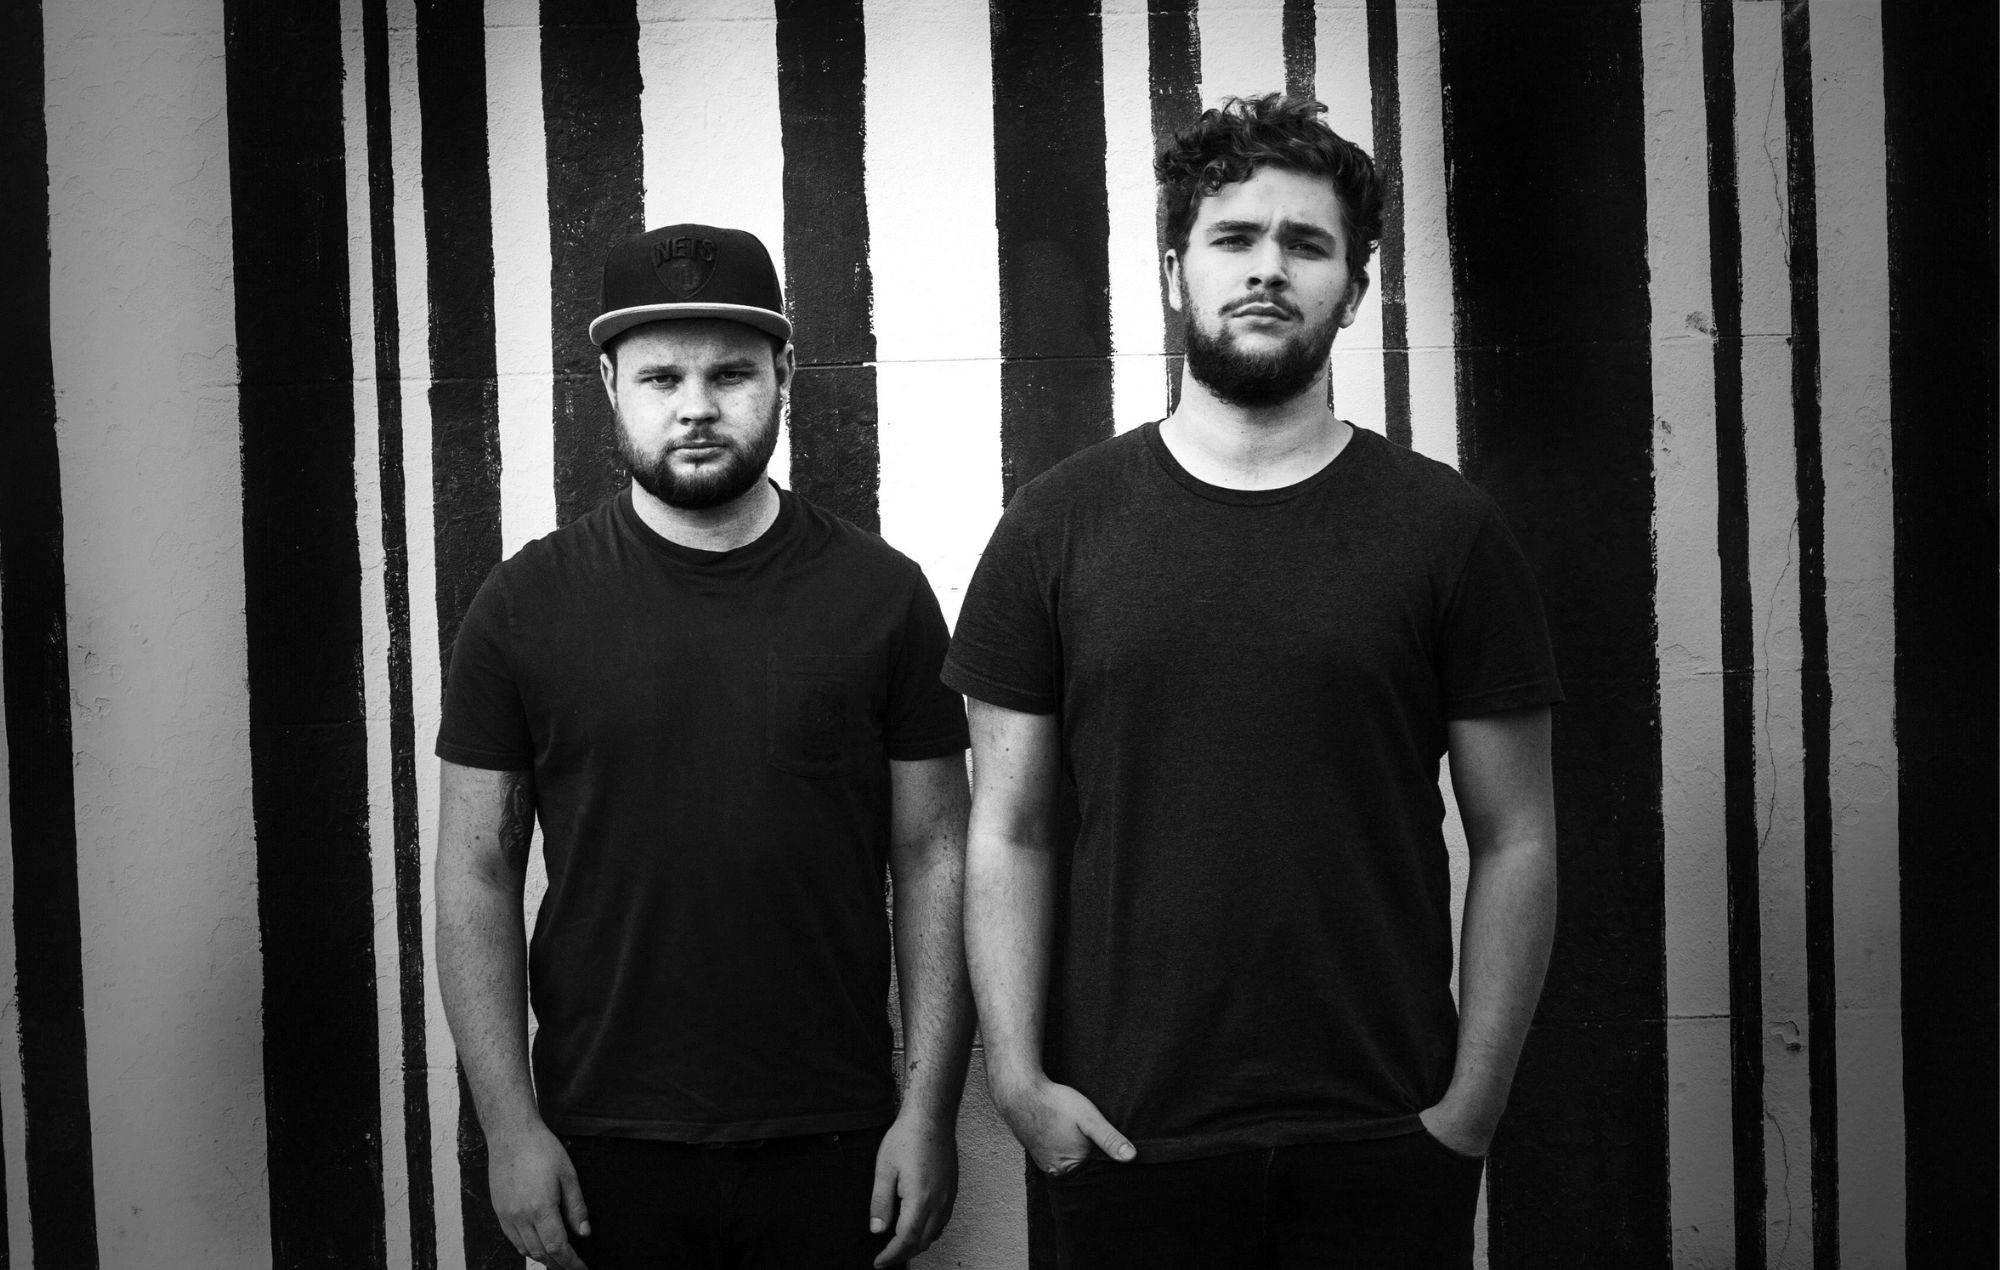 Royal Blood announce 10th anniversary reissue of debut album and UK and European tour